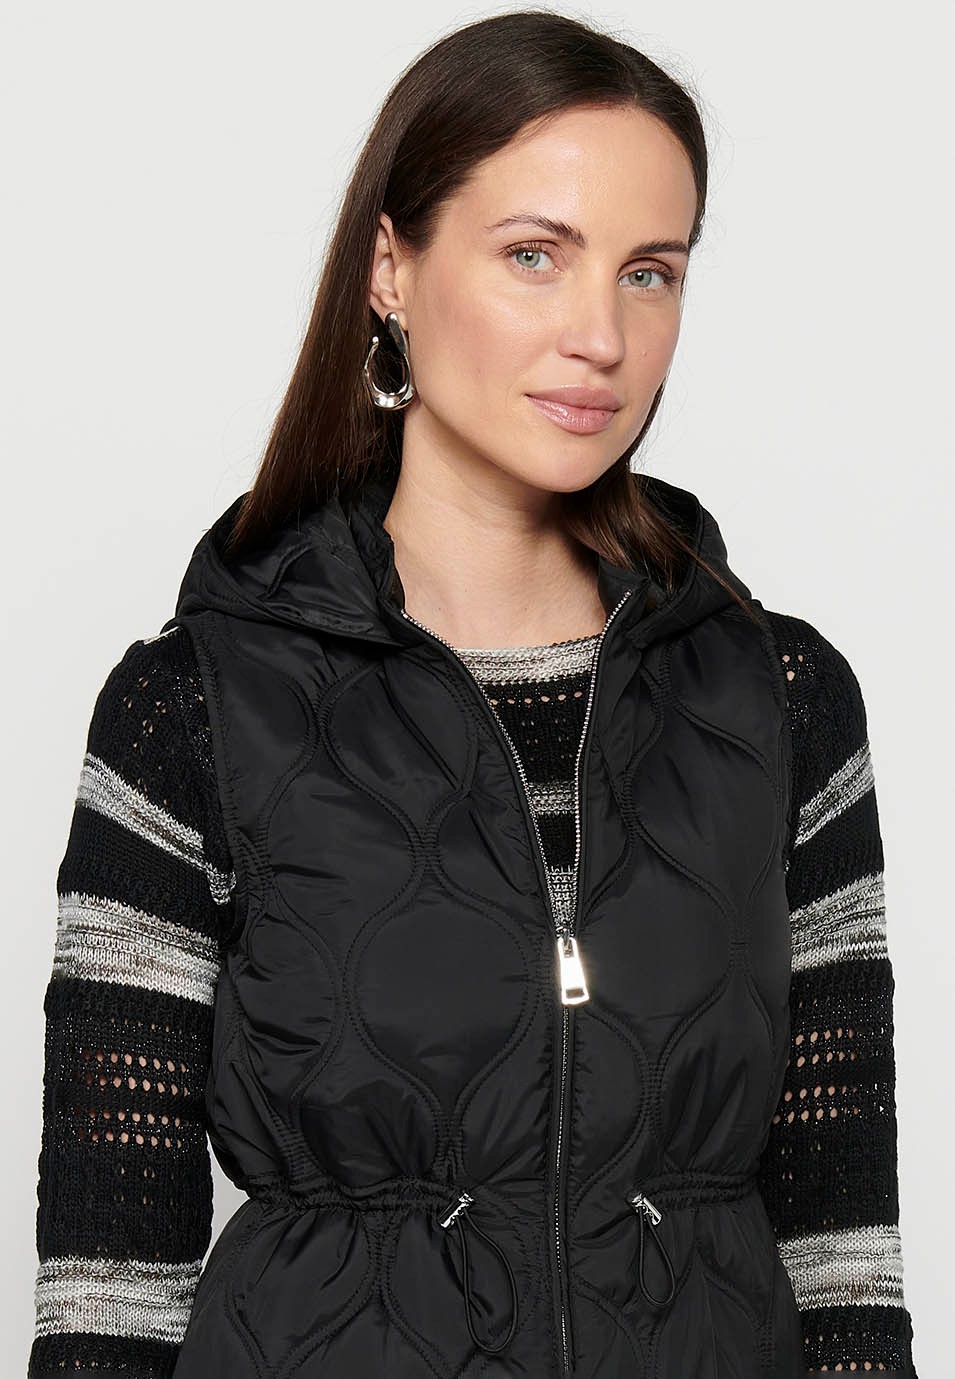 Padded vest with hooded collar and front zipper closure in Black for Women